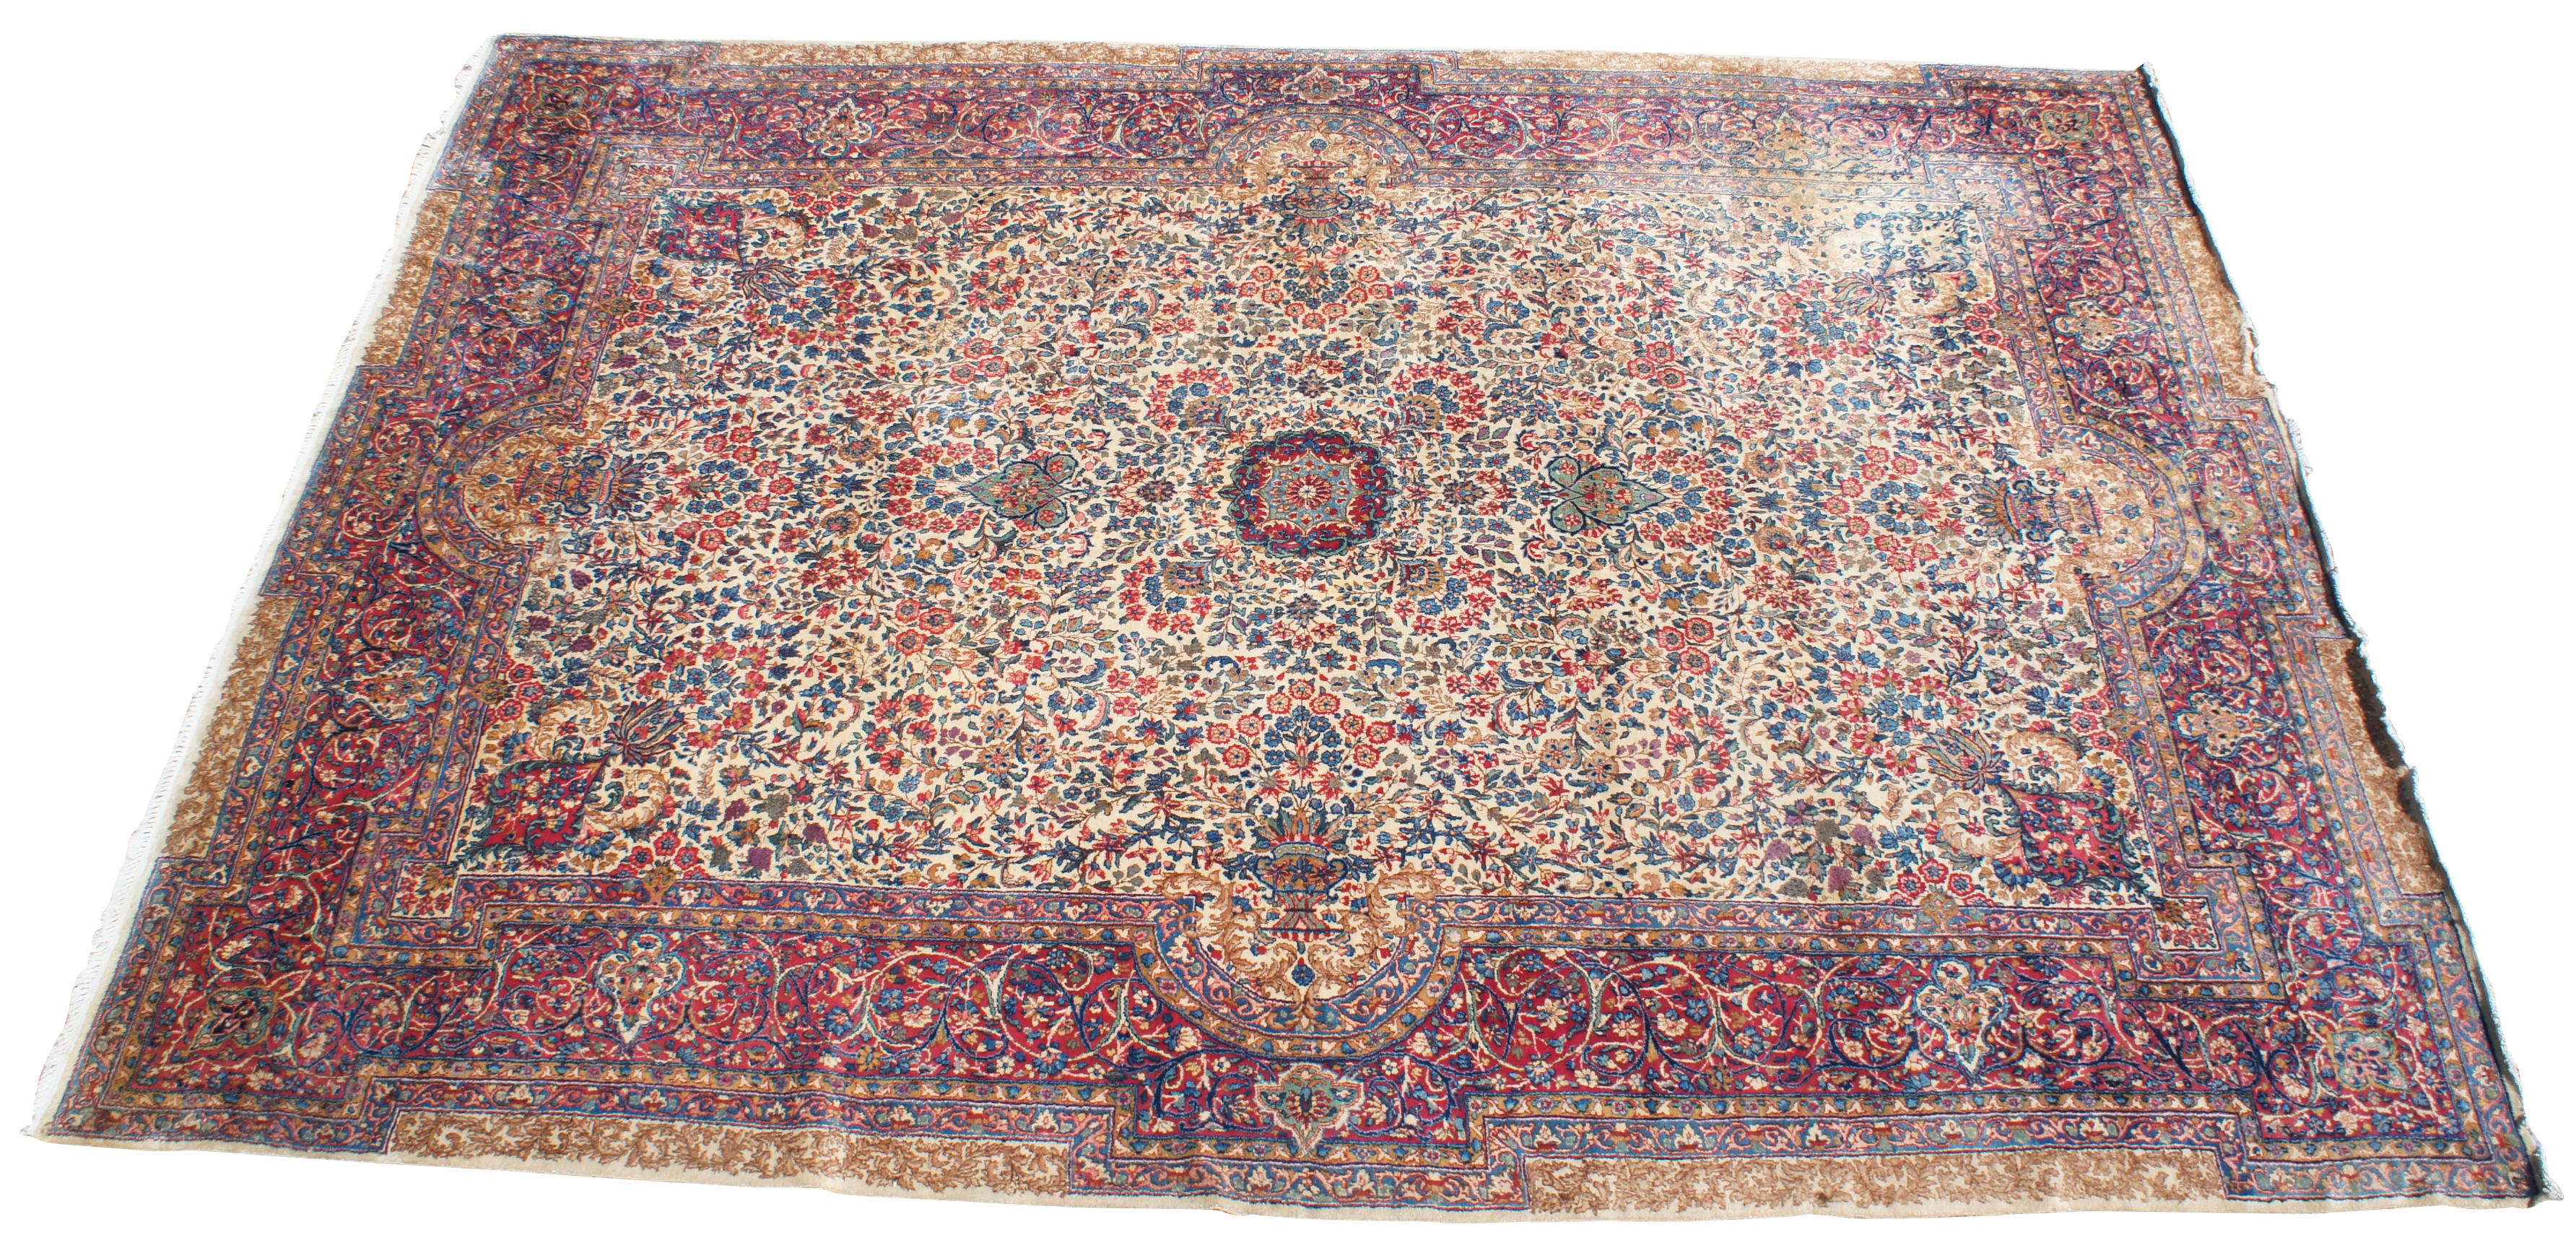 Beautiful botanical motifs establish a majestic formal atmosphere in this uniquely hued Persian Sino rug or carpet. Lavish floral with trophy urns and bouquets are arranged with exacting precision in geometric flowing arabesques. The color palette